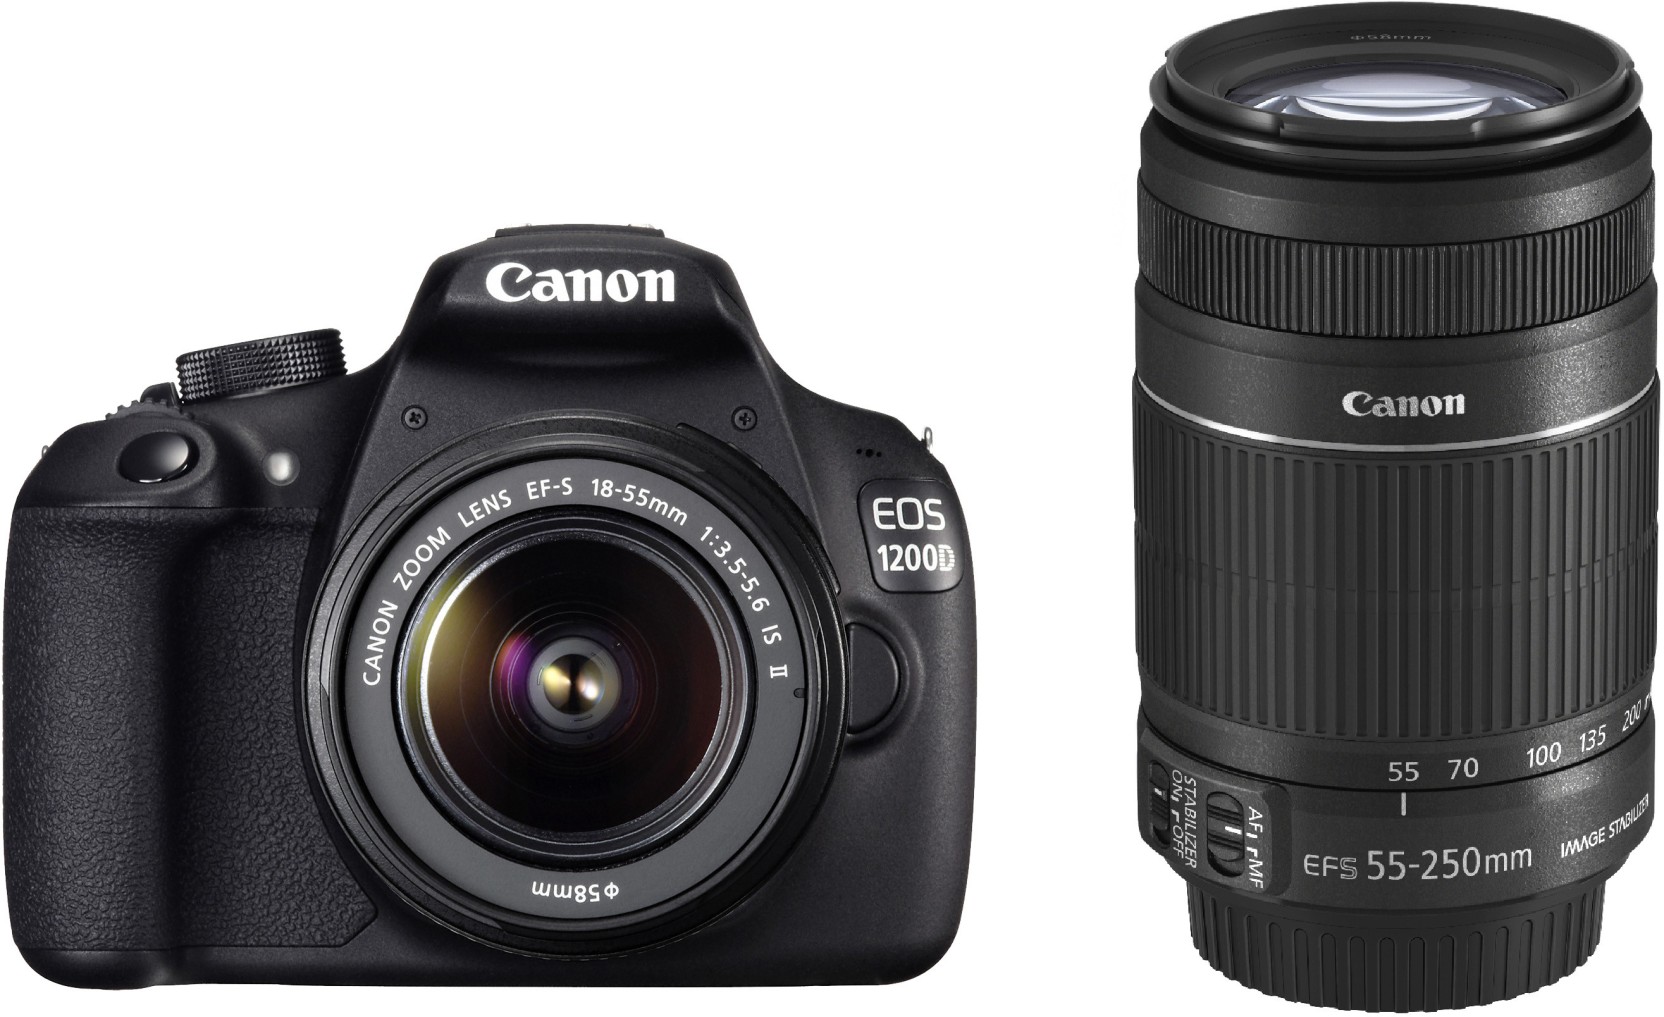 Canon EOS 1200D DSLR Camera (Body with 8 GB Card & Bag EF S18-55 IS II+55-250mm IS II) Price in ...